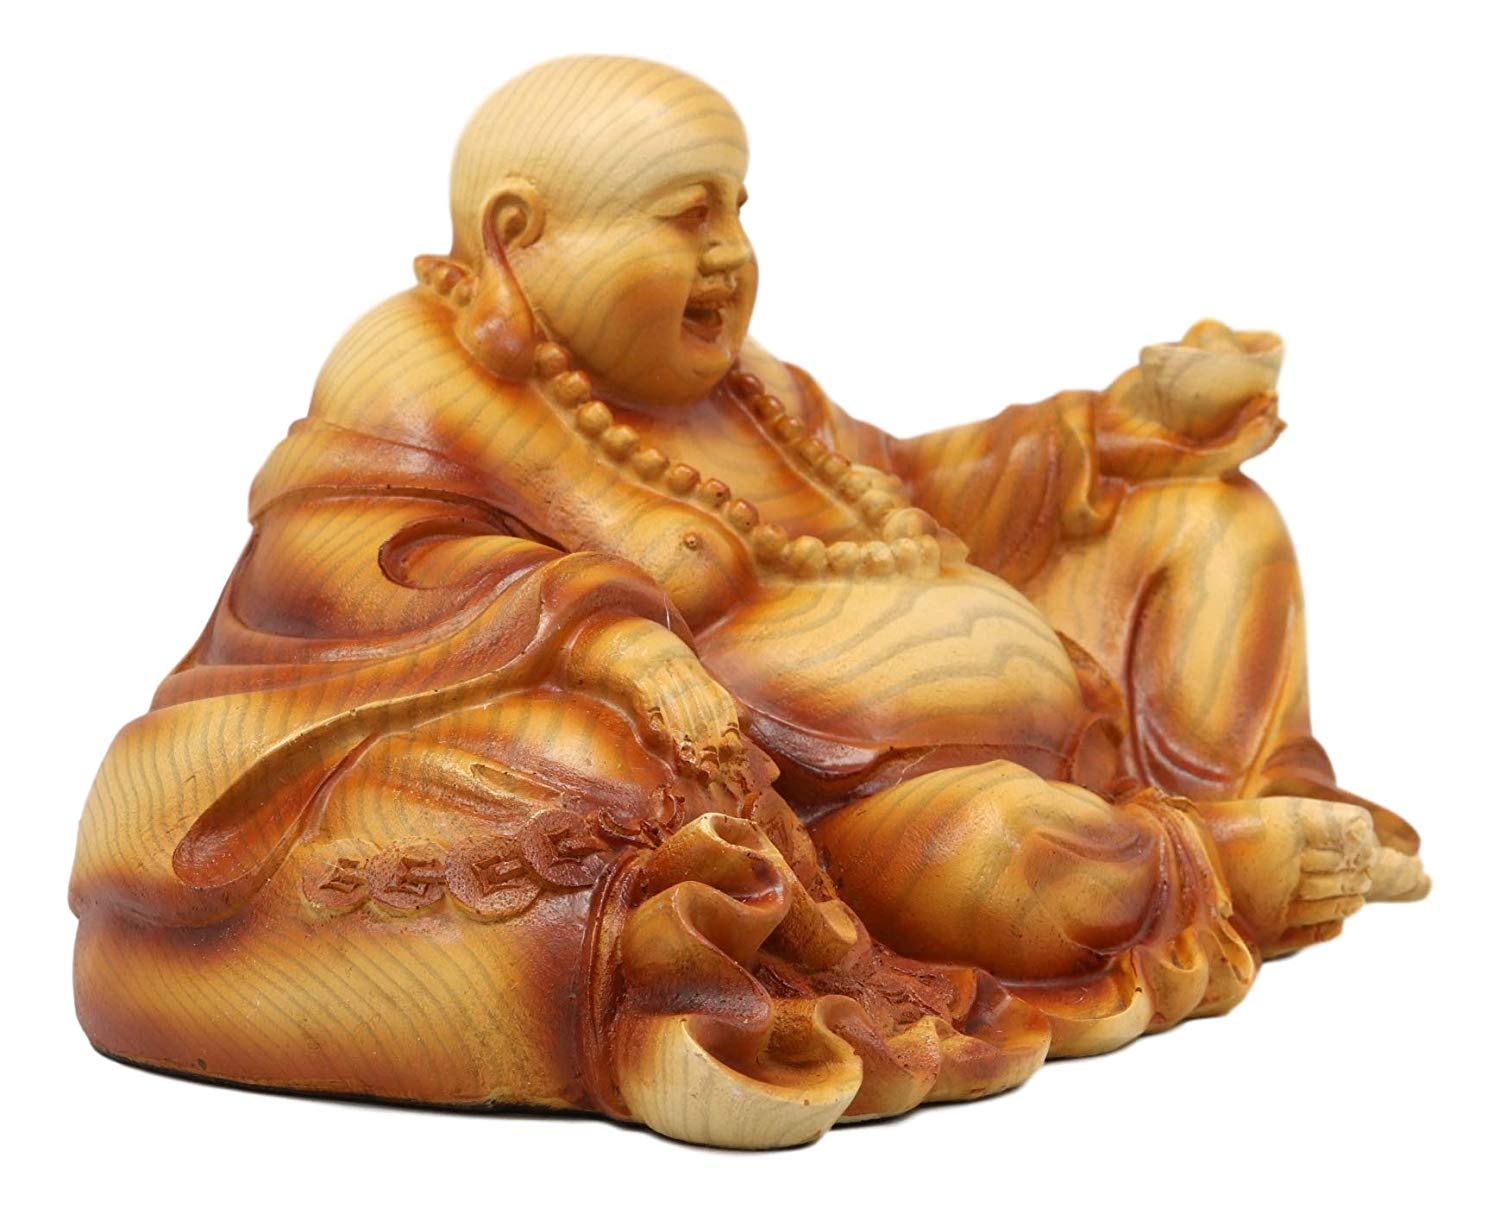 Ebros Gift Ebros Feng Shui Hotei Happy Buddha Sitting with Gold Ingot and Money Coins Figurine 9" Wide Zen Laughing Lucky Buddhas Budai...